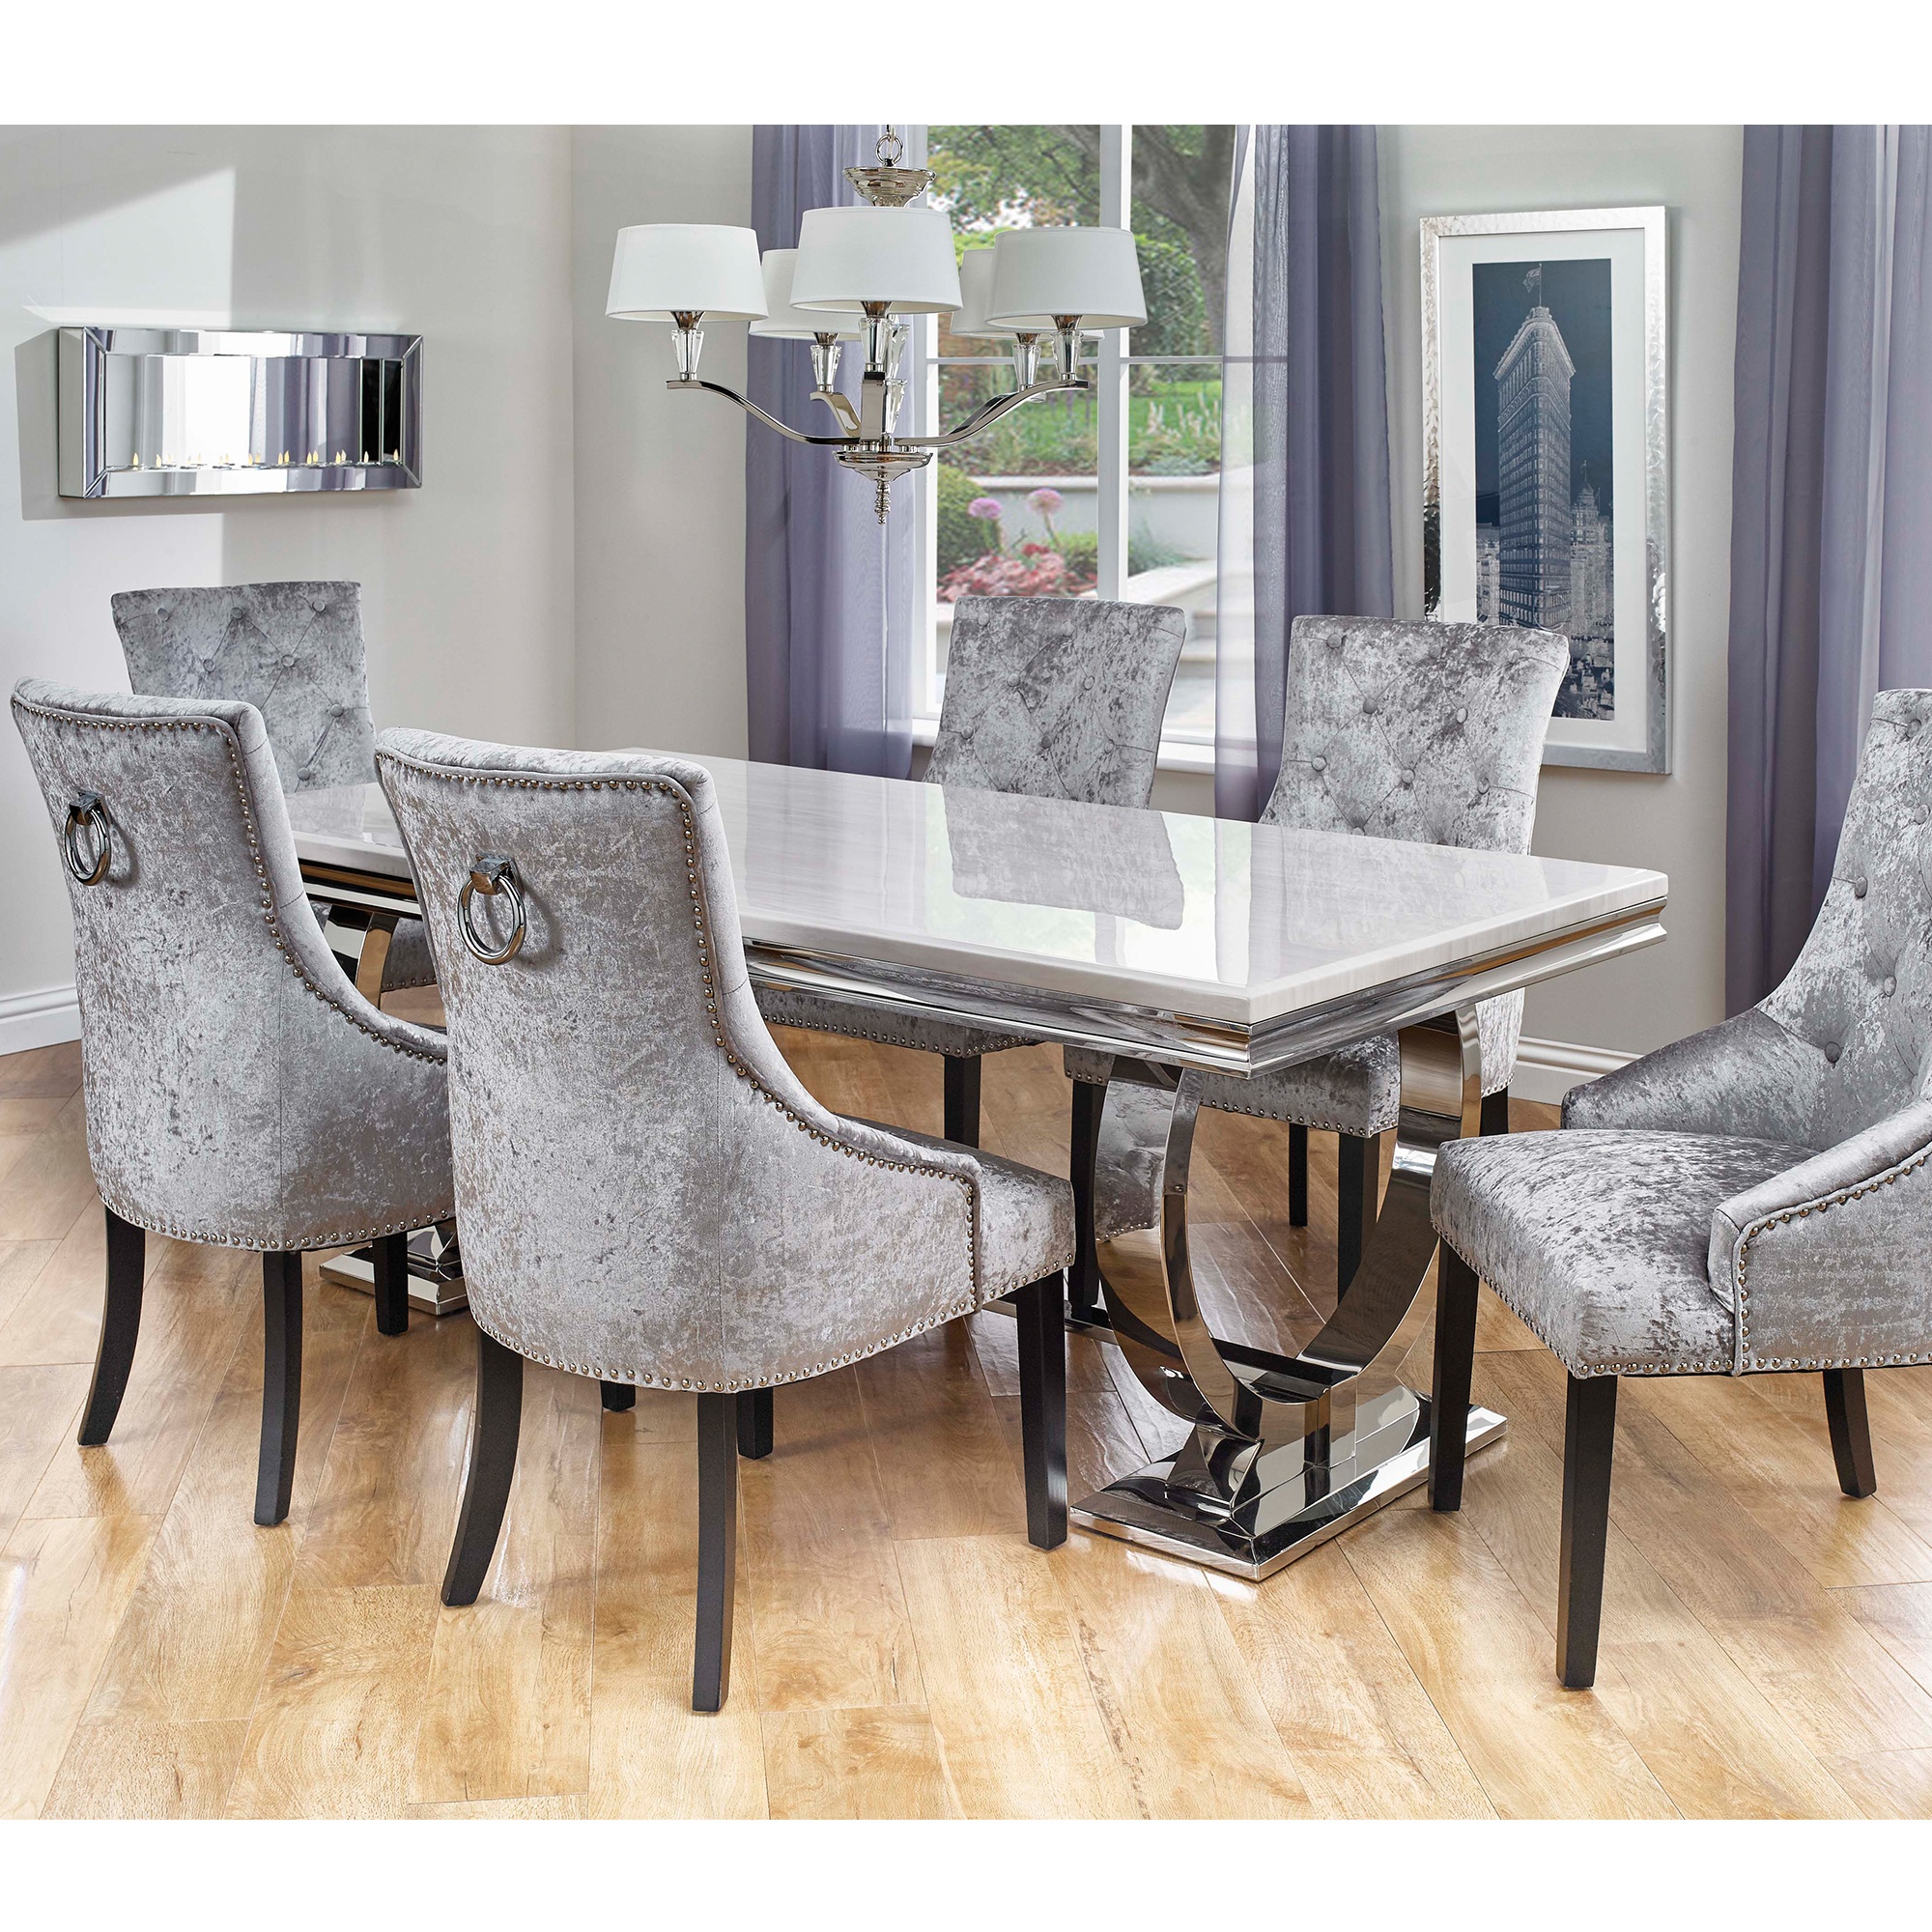 Dining Table Chairs Images - Counter Height Dinette Sets – Homesfeed ...